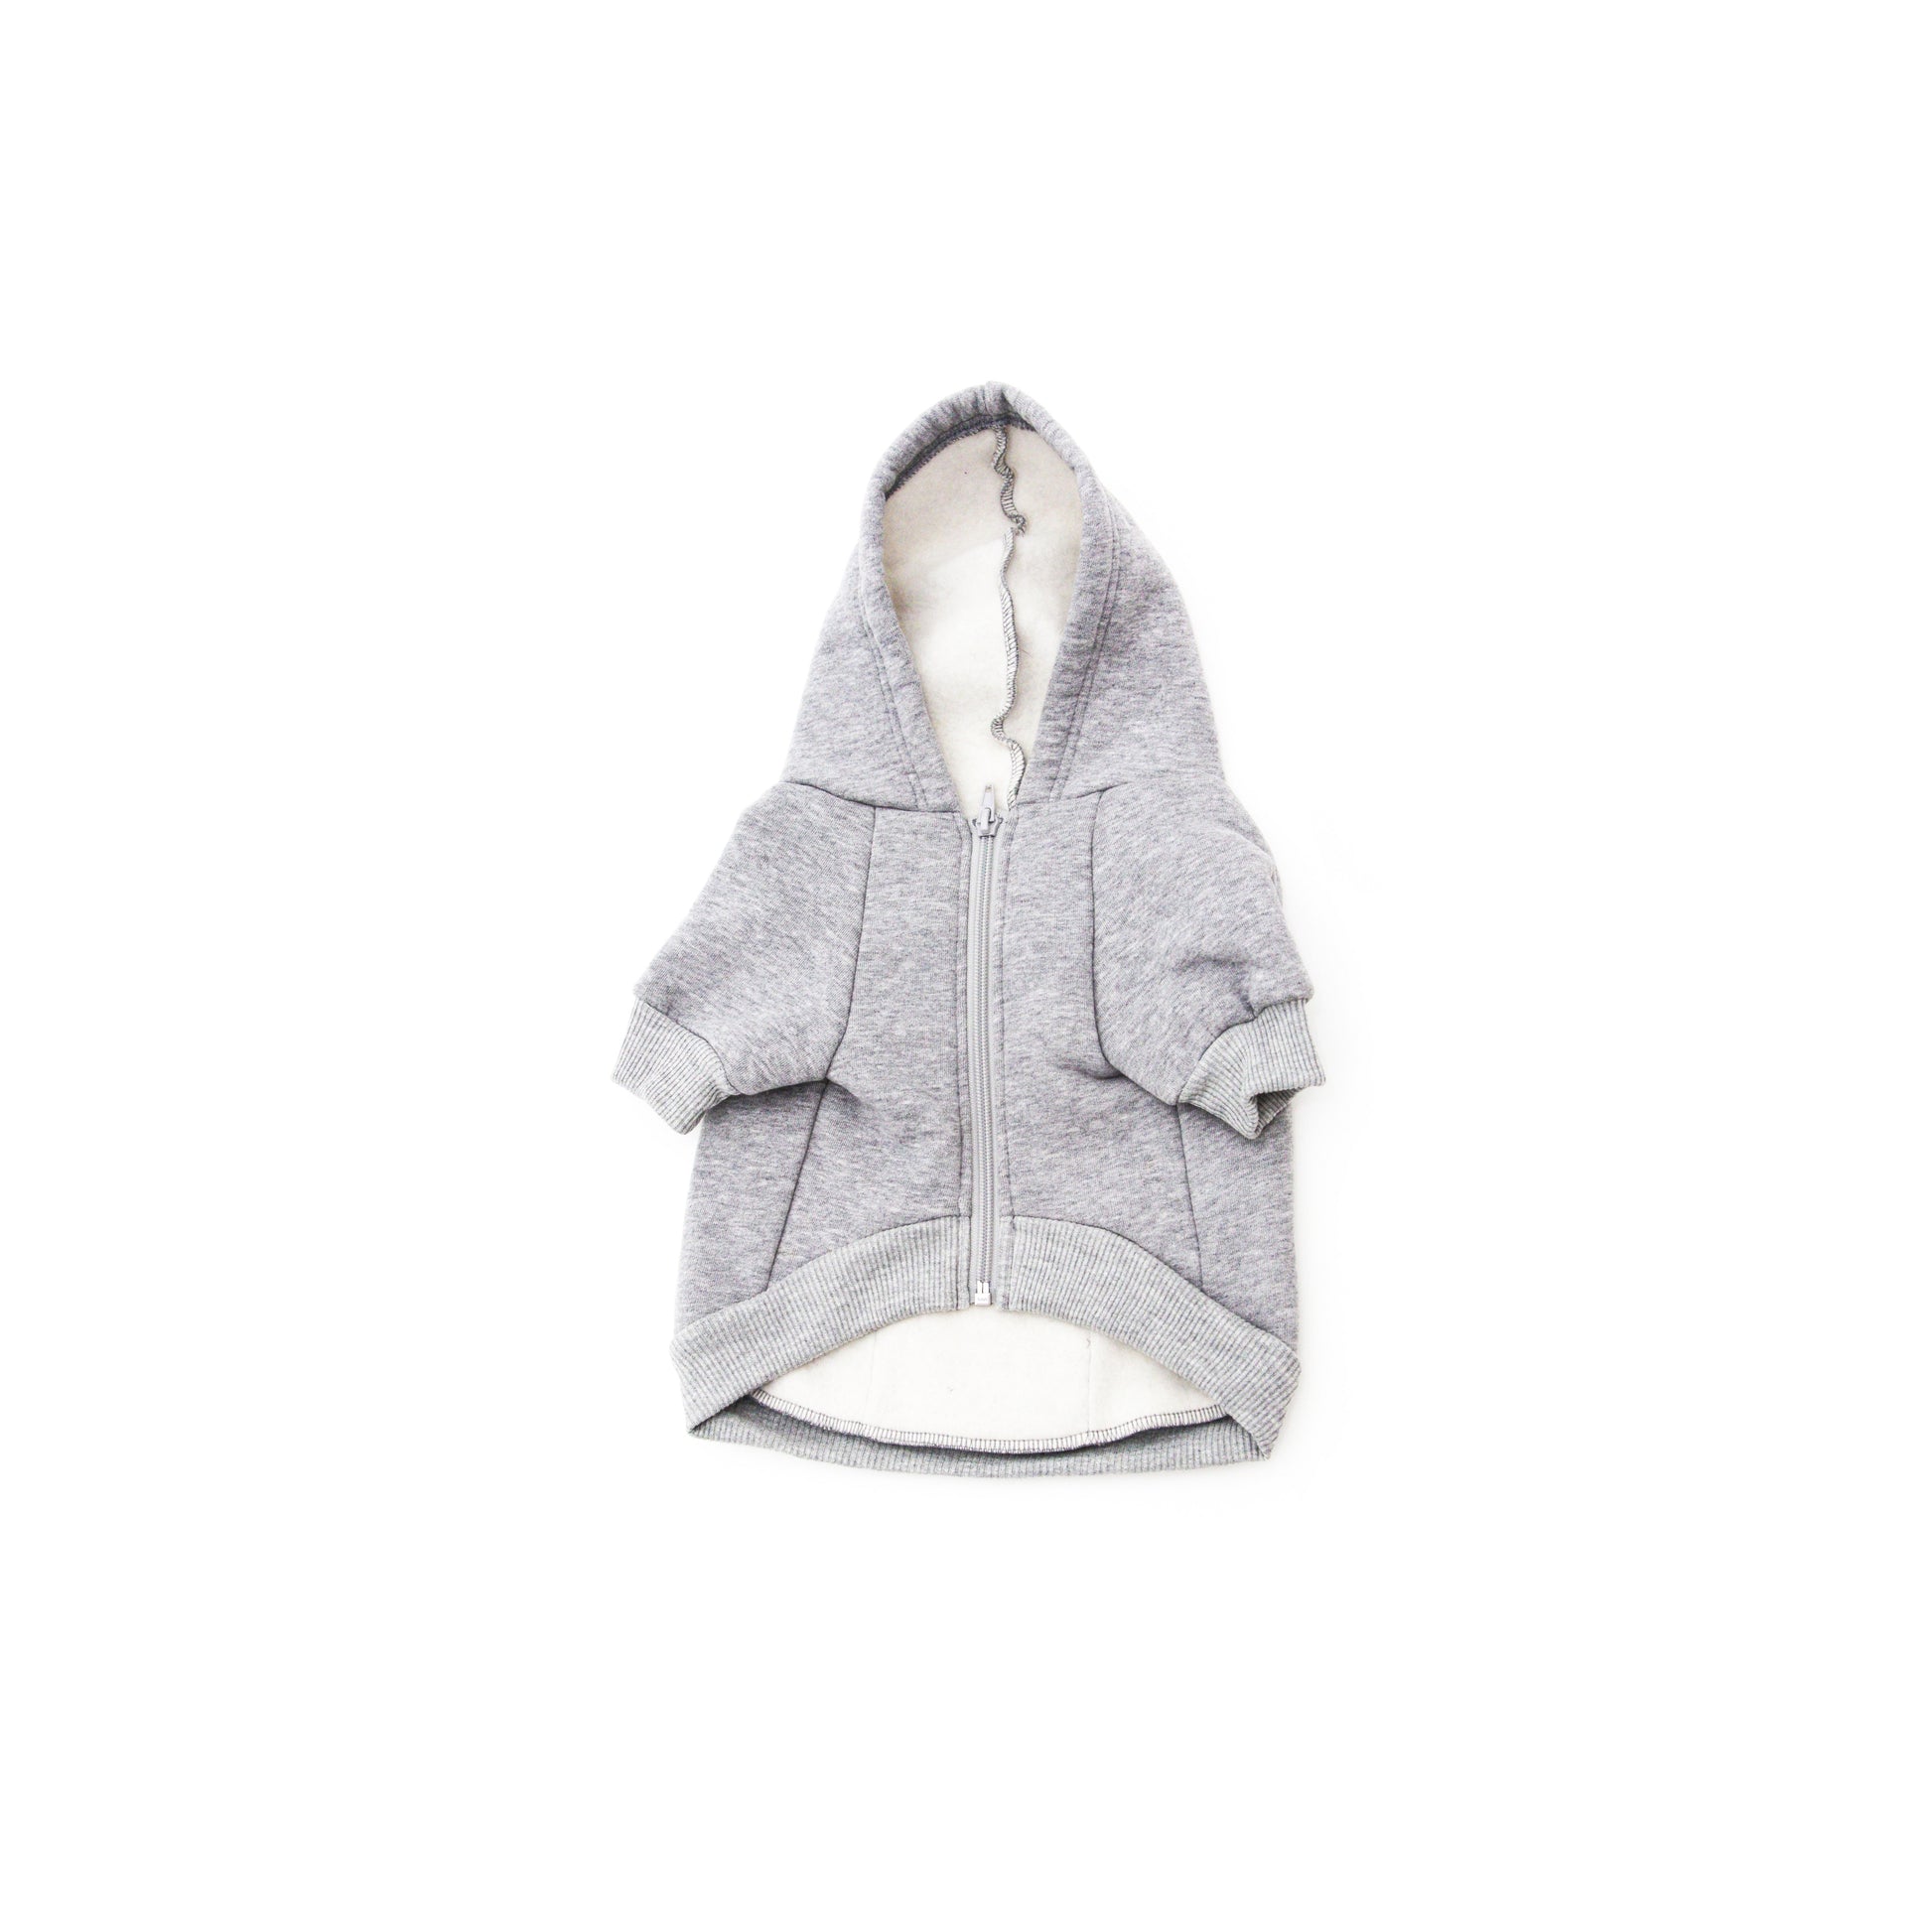 Sweatshirt for pets and dogs in grey heather cotton fleece